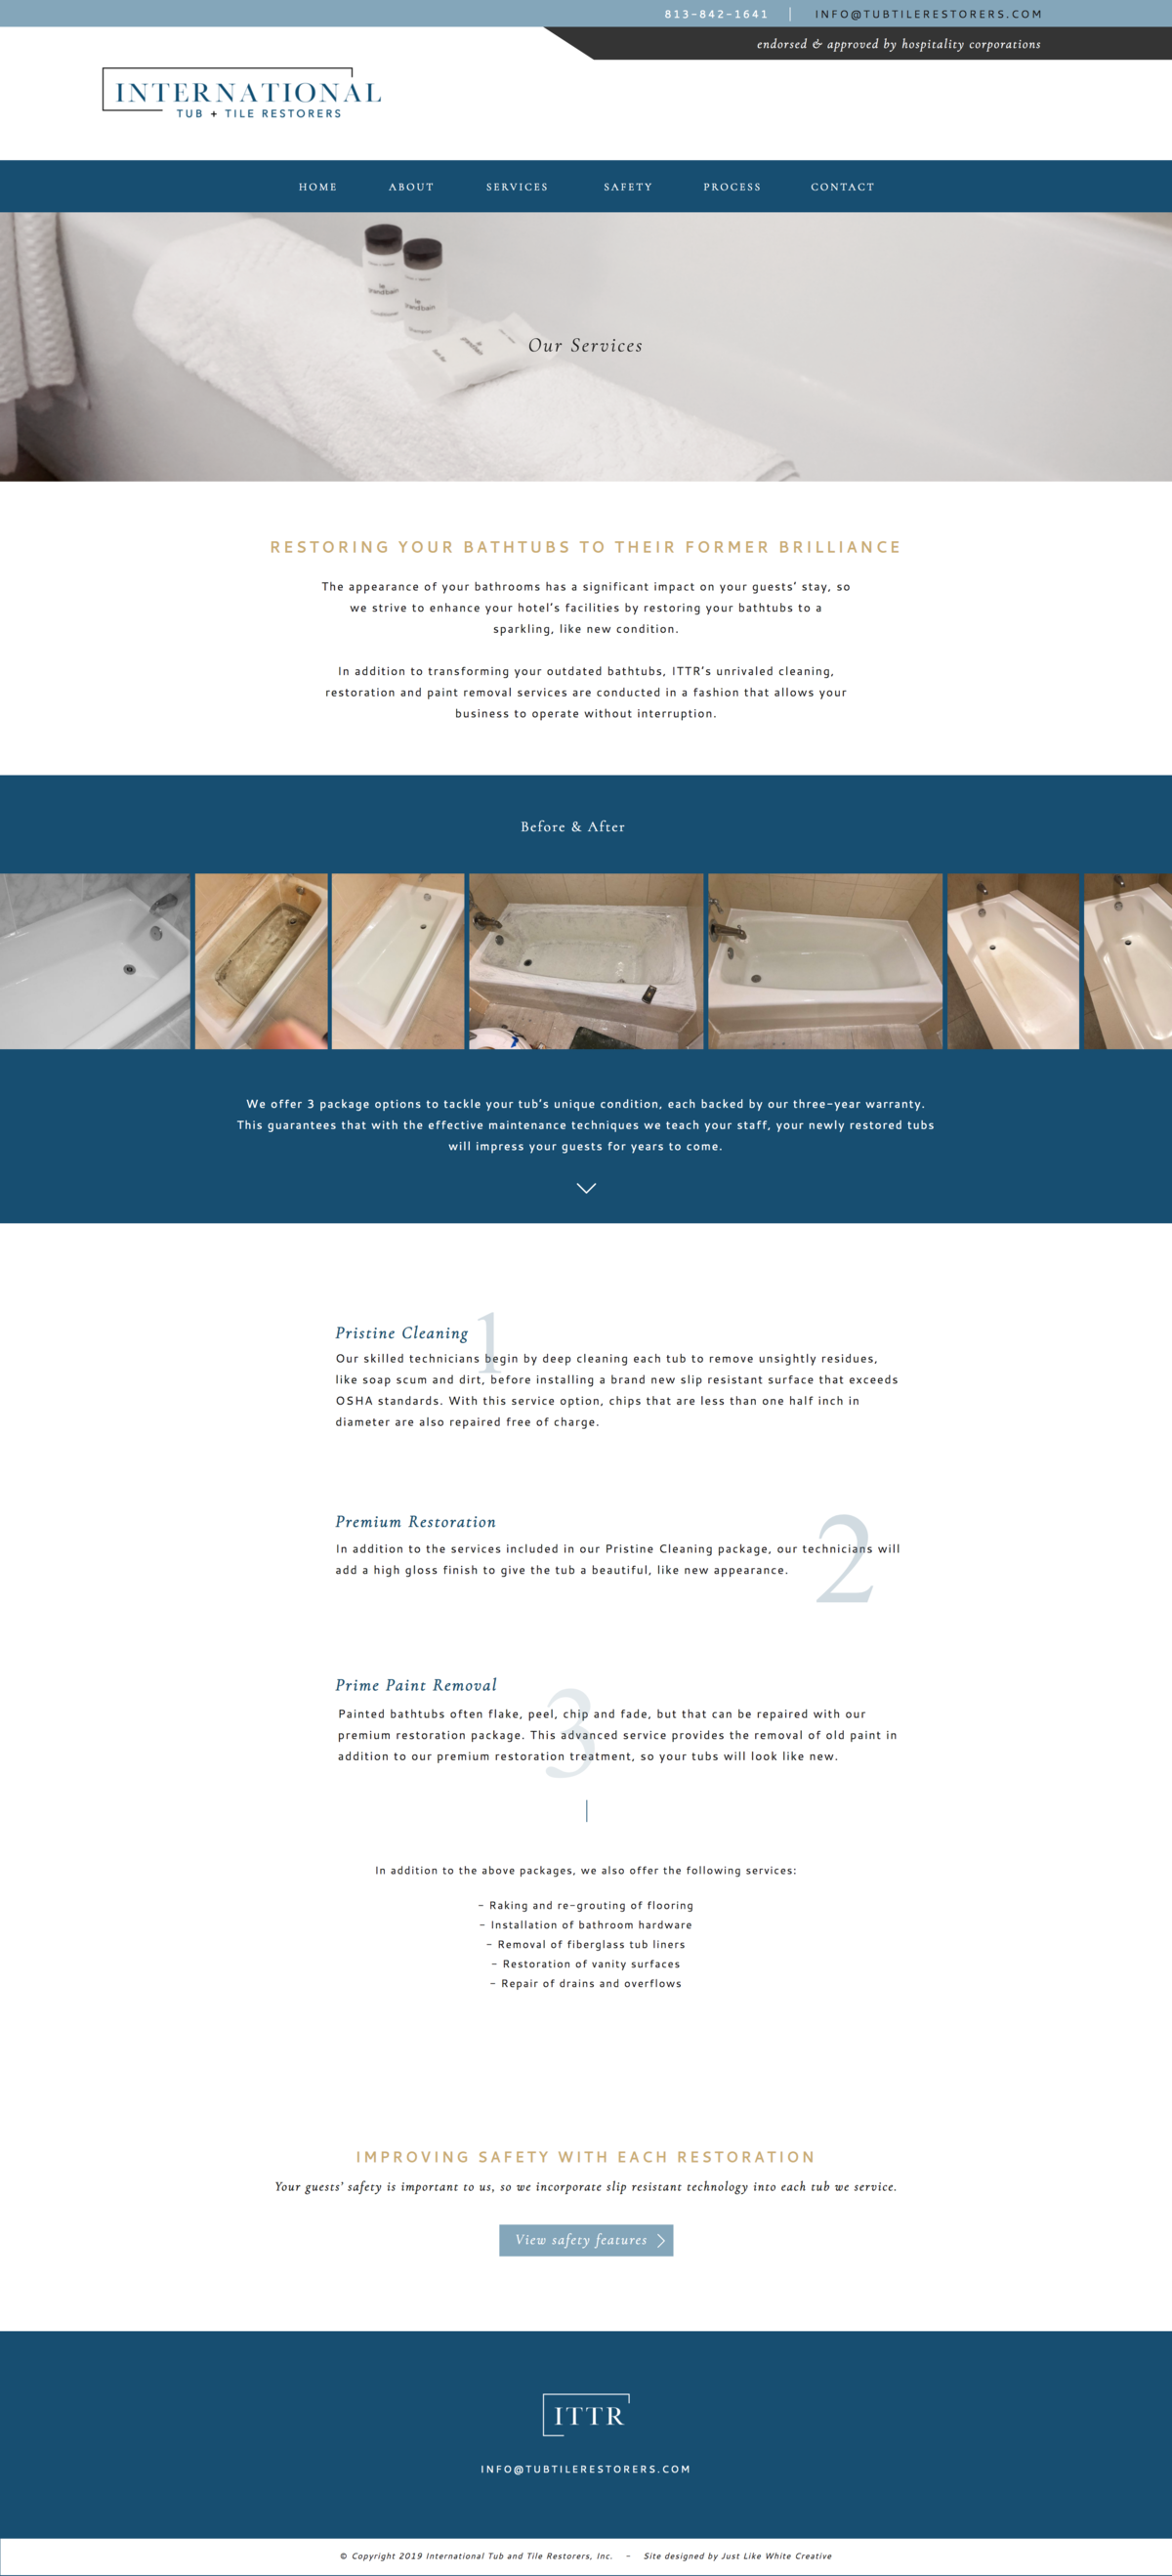 Professional website design by Tribble Design Co.